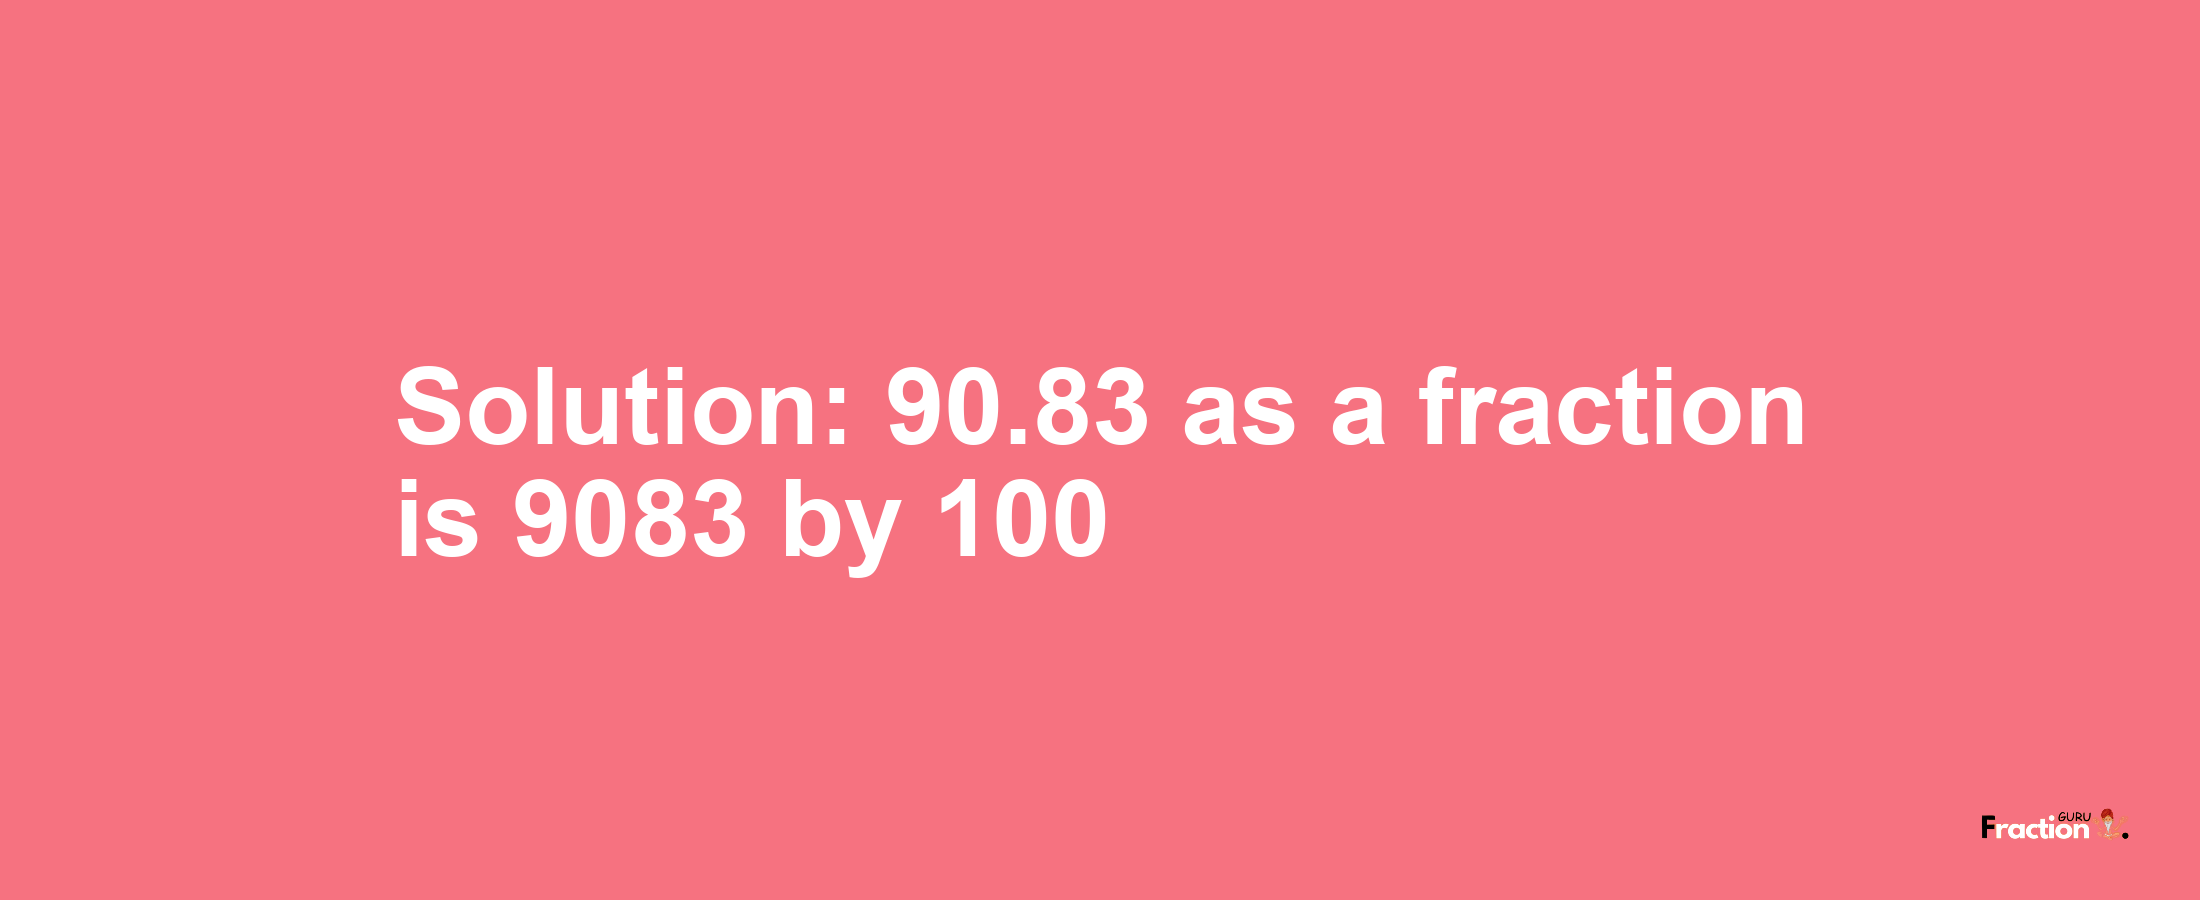 Solution:90.83 as a fraction is 9083/100